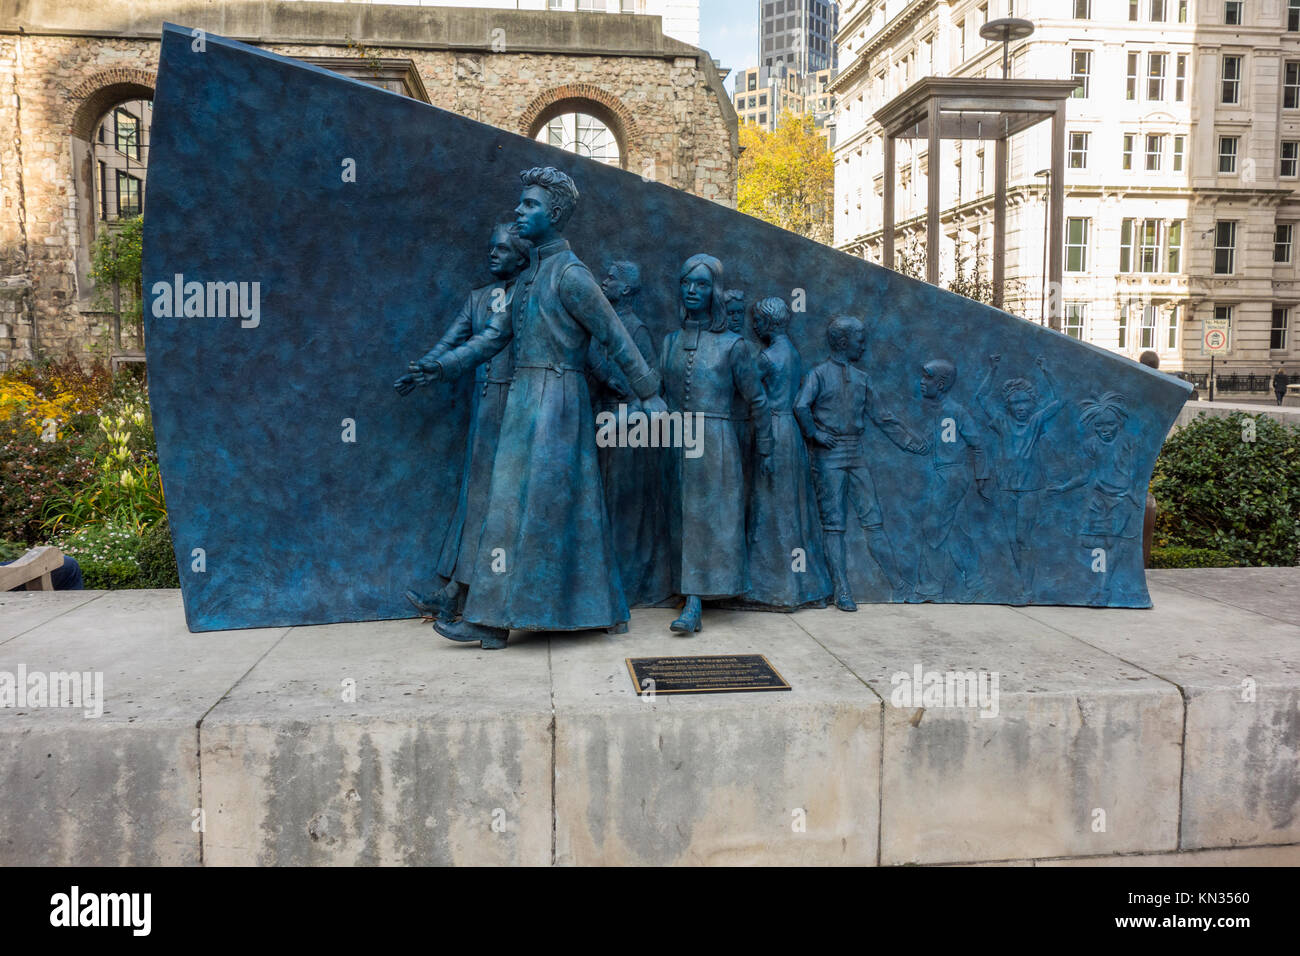 Sculpture by Andrew F Brown to commemorate 350 years of Christ's Hospital School in the City of London, UK. 2017 Stock Photo